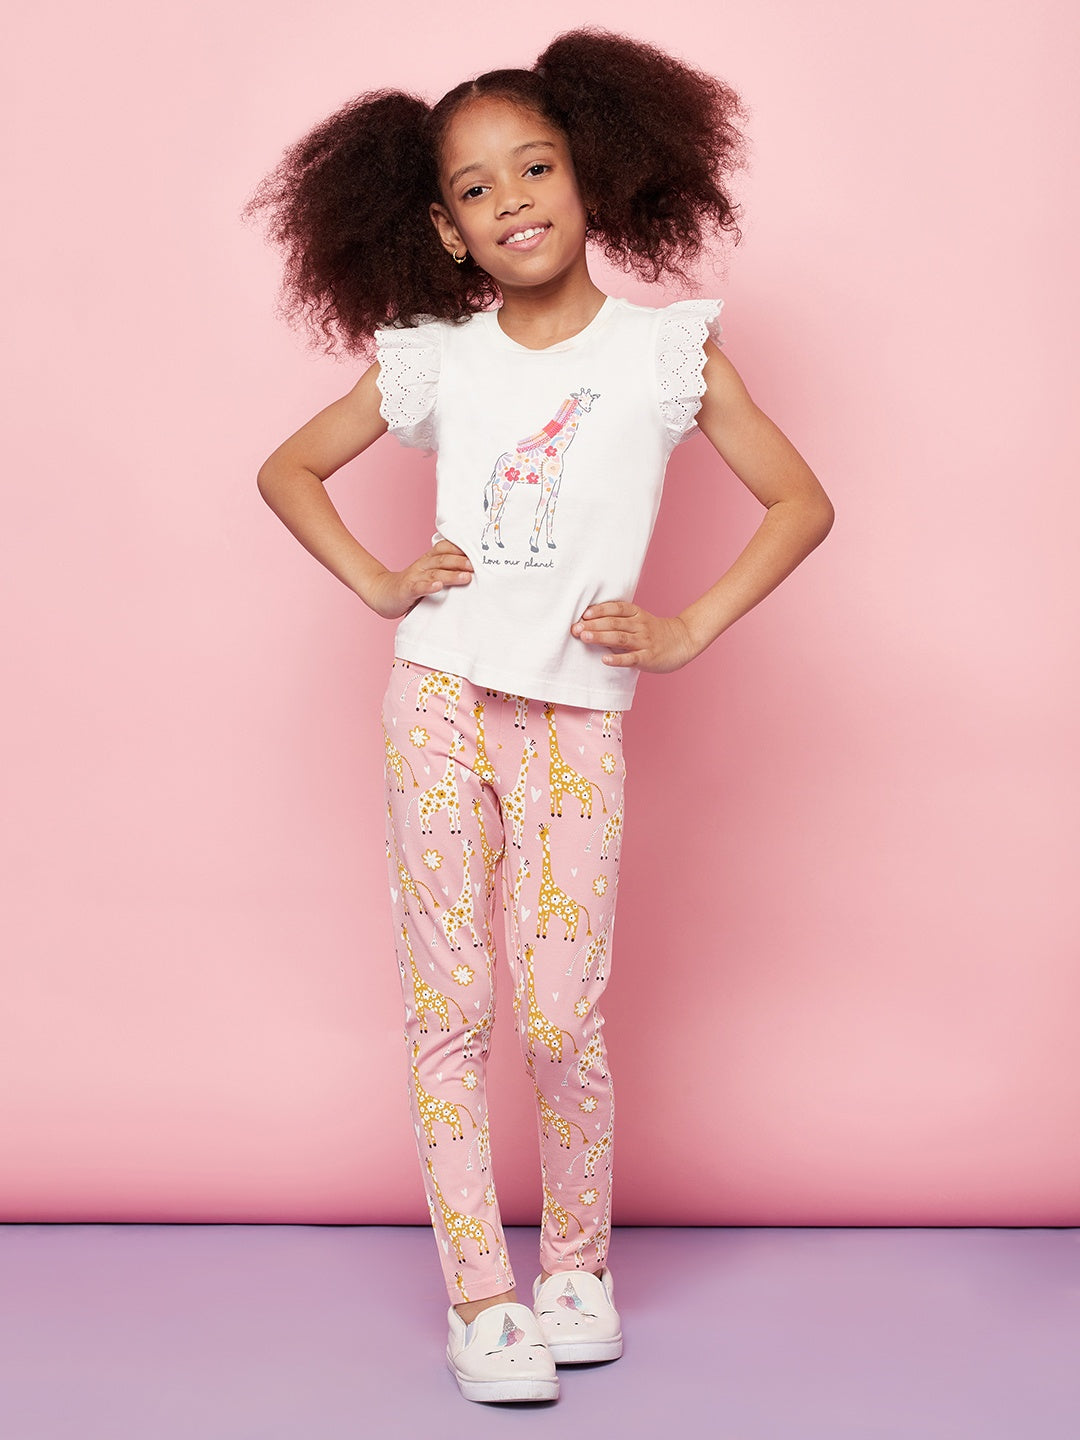 Kid Girls' White T-Shirt with Ruffle Sleeves and Pink Pants